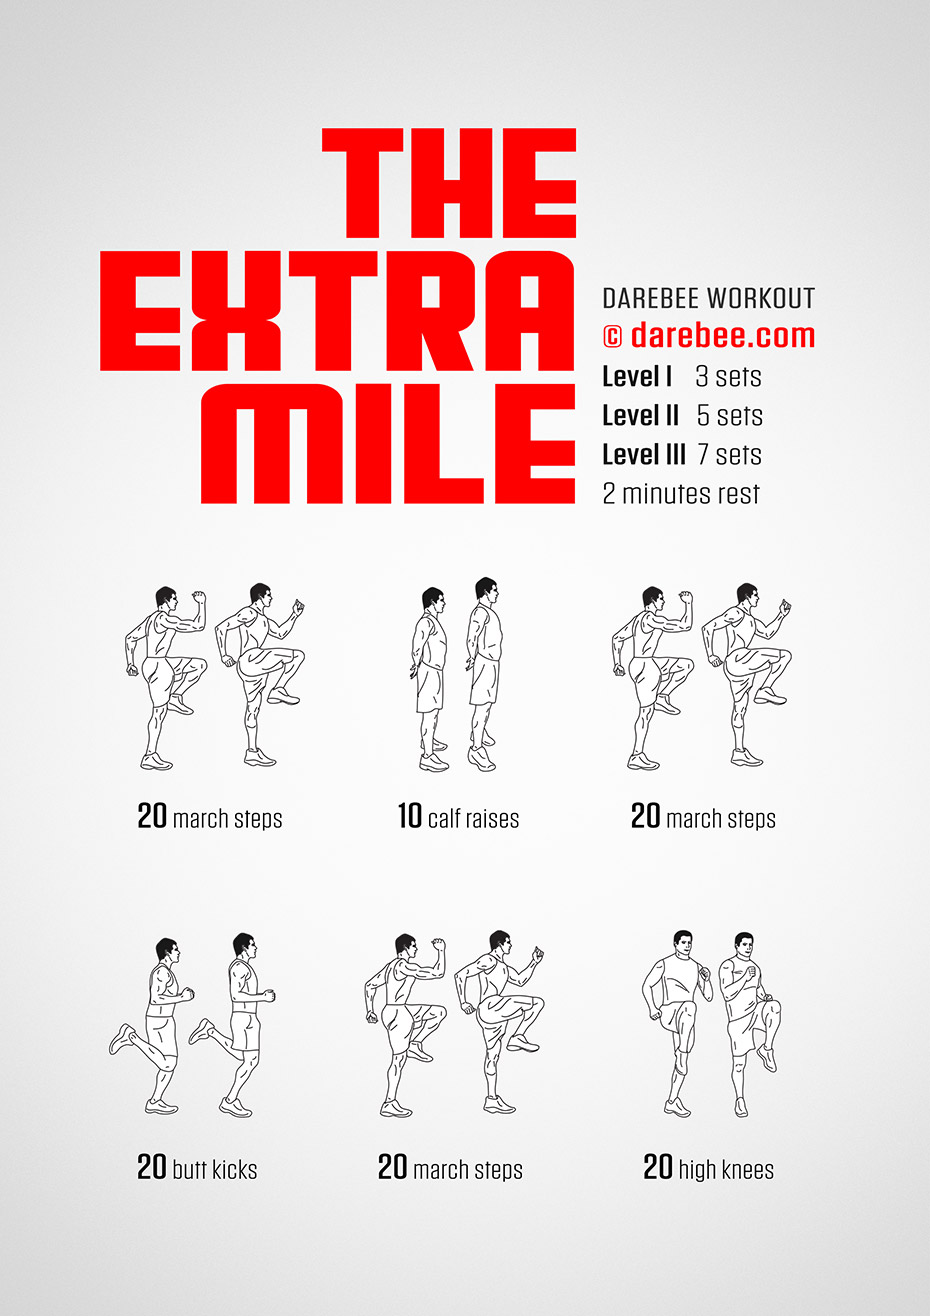 The Extra Mile is a DAREBEE workout that pushes your body and mind to perform at high intensity over a period of time.